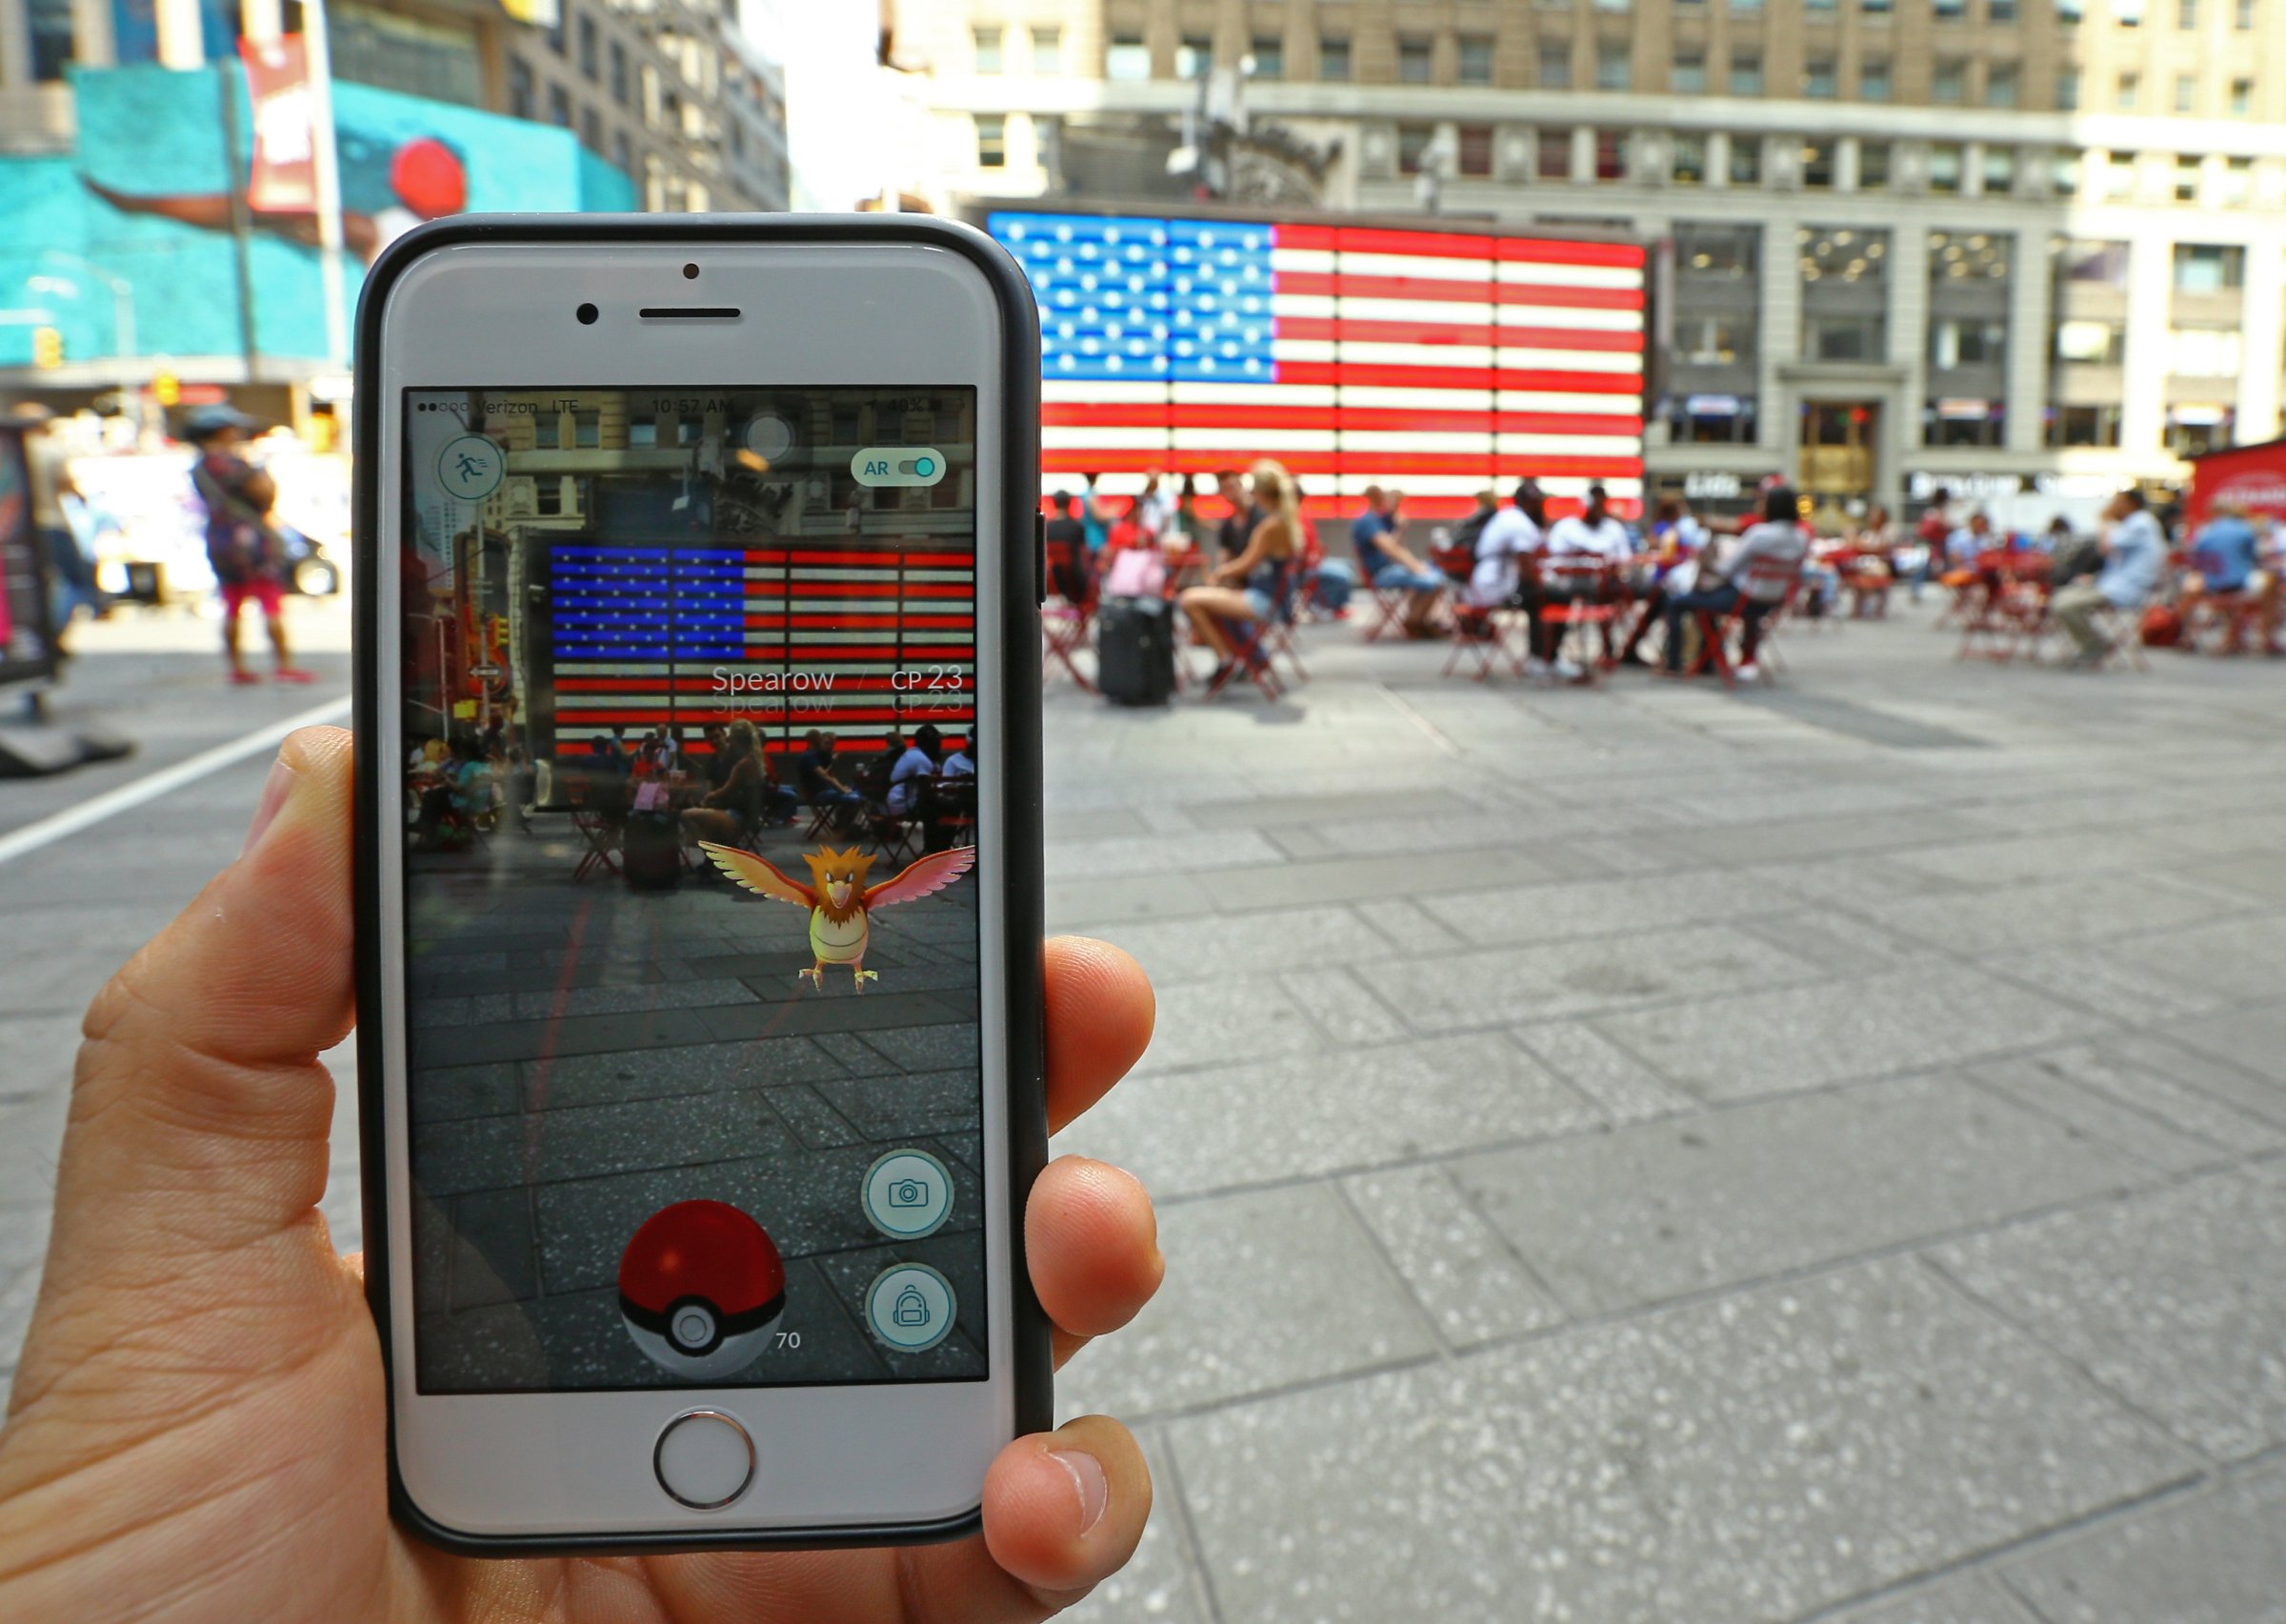 A Pokemon Go user plays Pokemon GO game in New York City, NY on July 13, 2016.